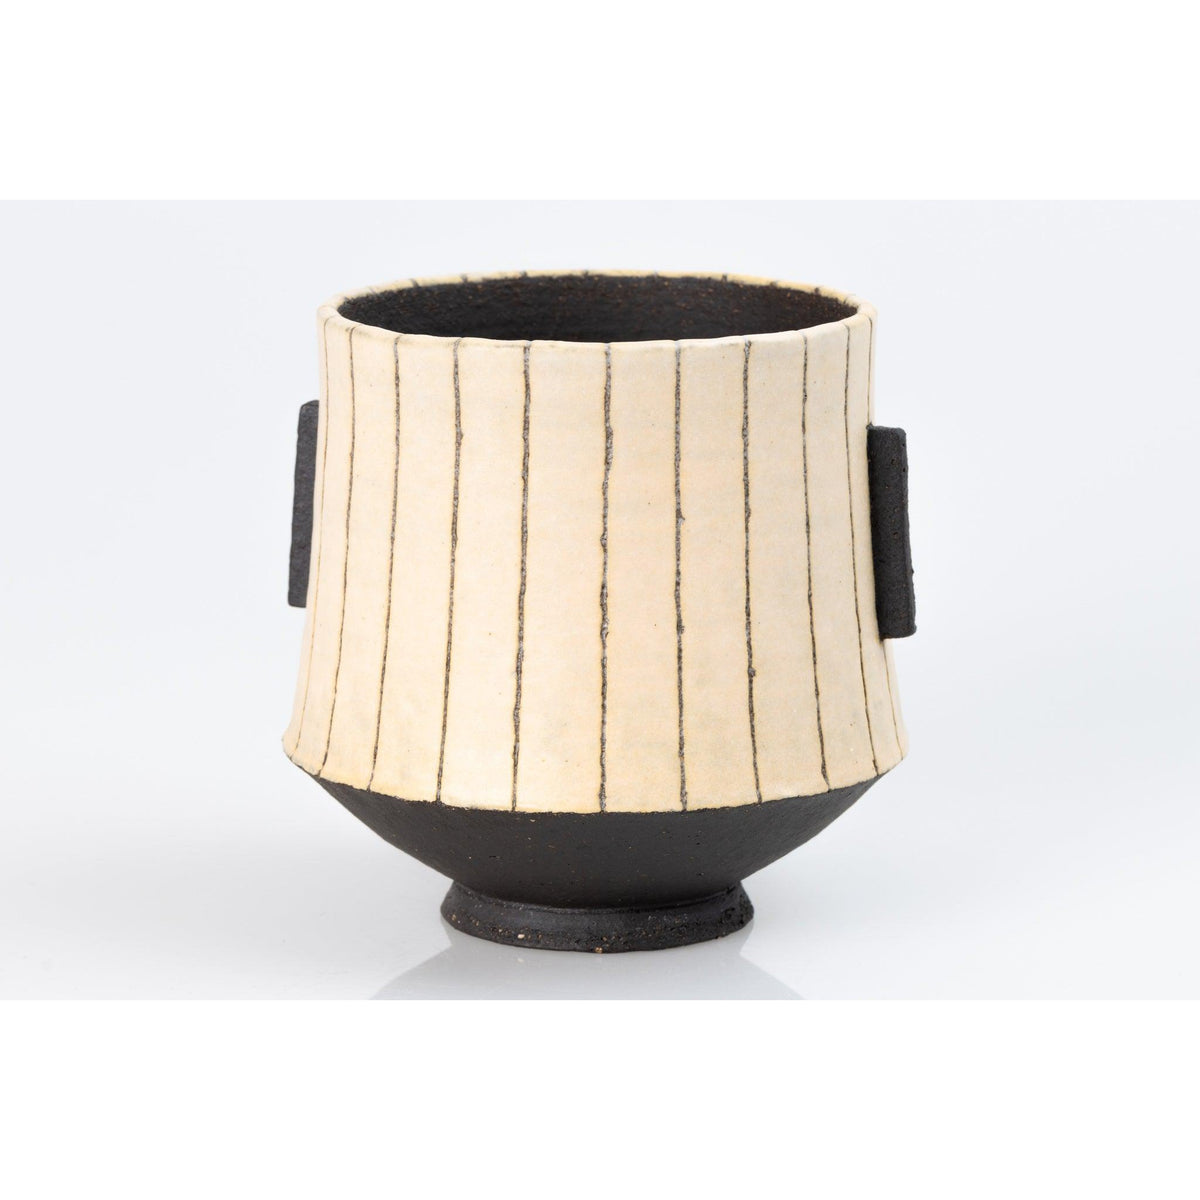 &#39;AP39 Black Stripy Vessel - Amber&#39; by Ania Perkowska, available at Padstow Gallery, Cornwall